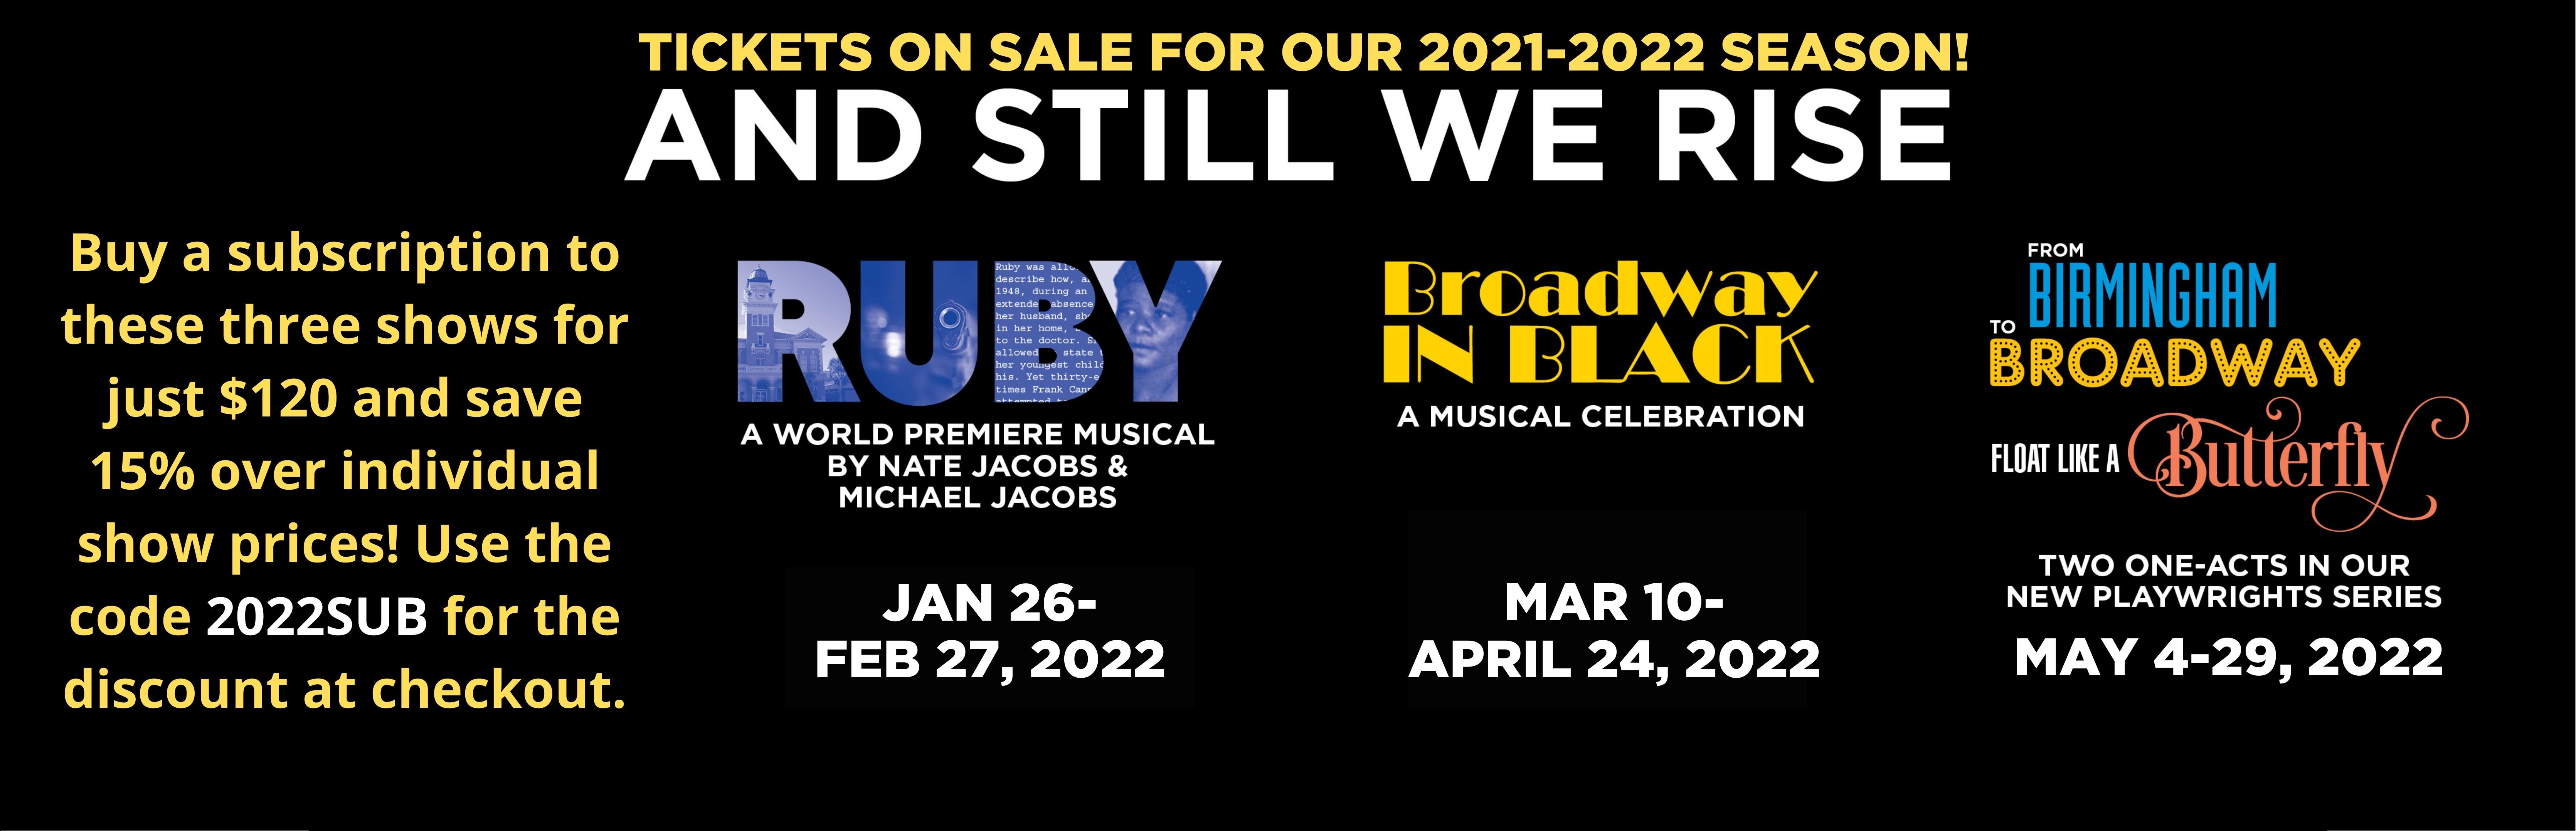 Tickets On Sale for Our 2021-2022 Season!